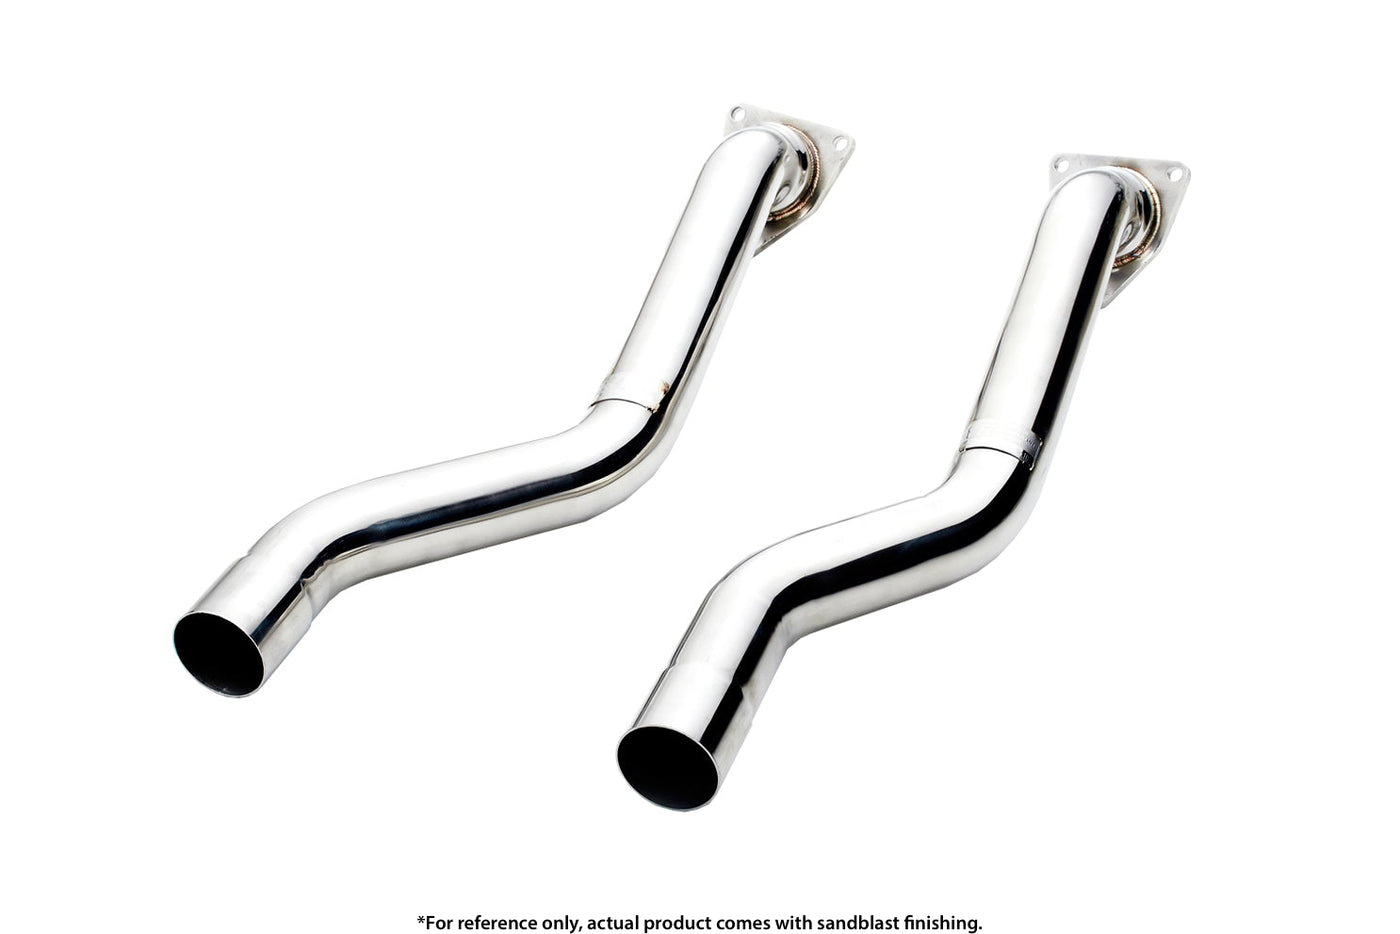 ipe-porsche-cayenne-turbo-955-exhaust-front-pipe